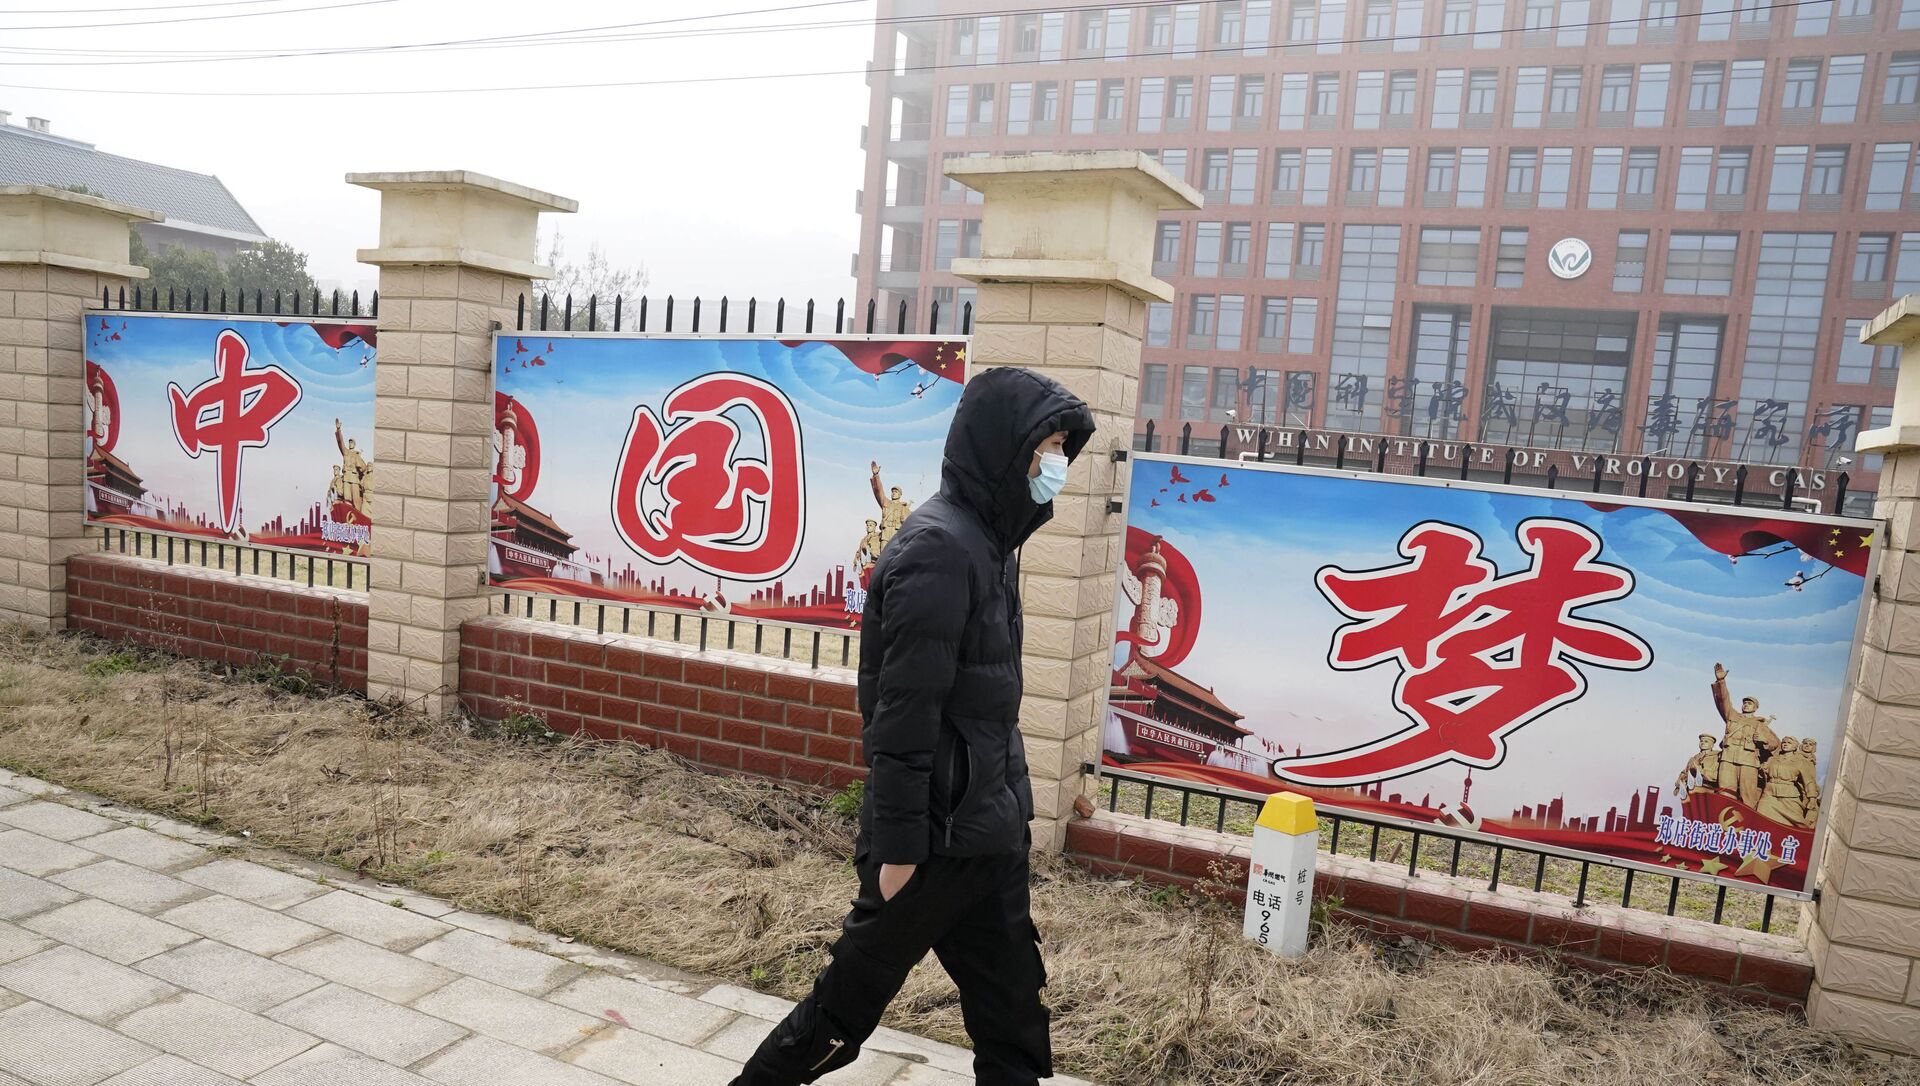 A man passes by the words China Dream outside the entrance to the Wuhan Institute of Virology during a visit by a World Health Organization team in Wuhan in China's Hubei province on Wednesday, Feb. 3, 2021 - Sputnik International, 1920, 16.07.2021